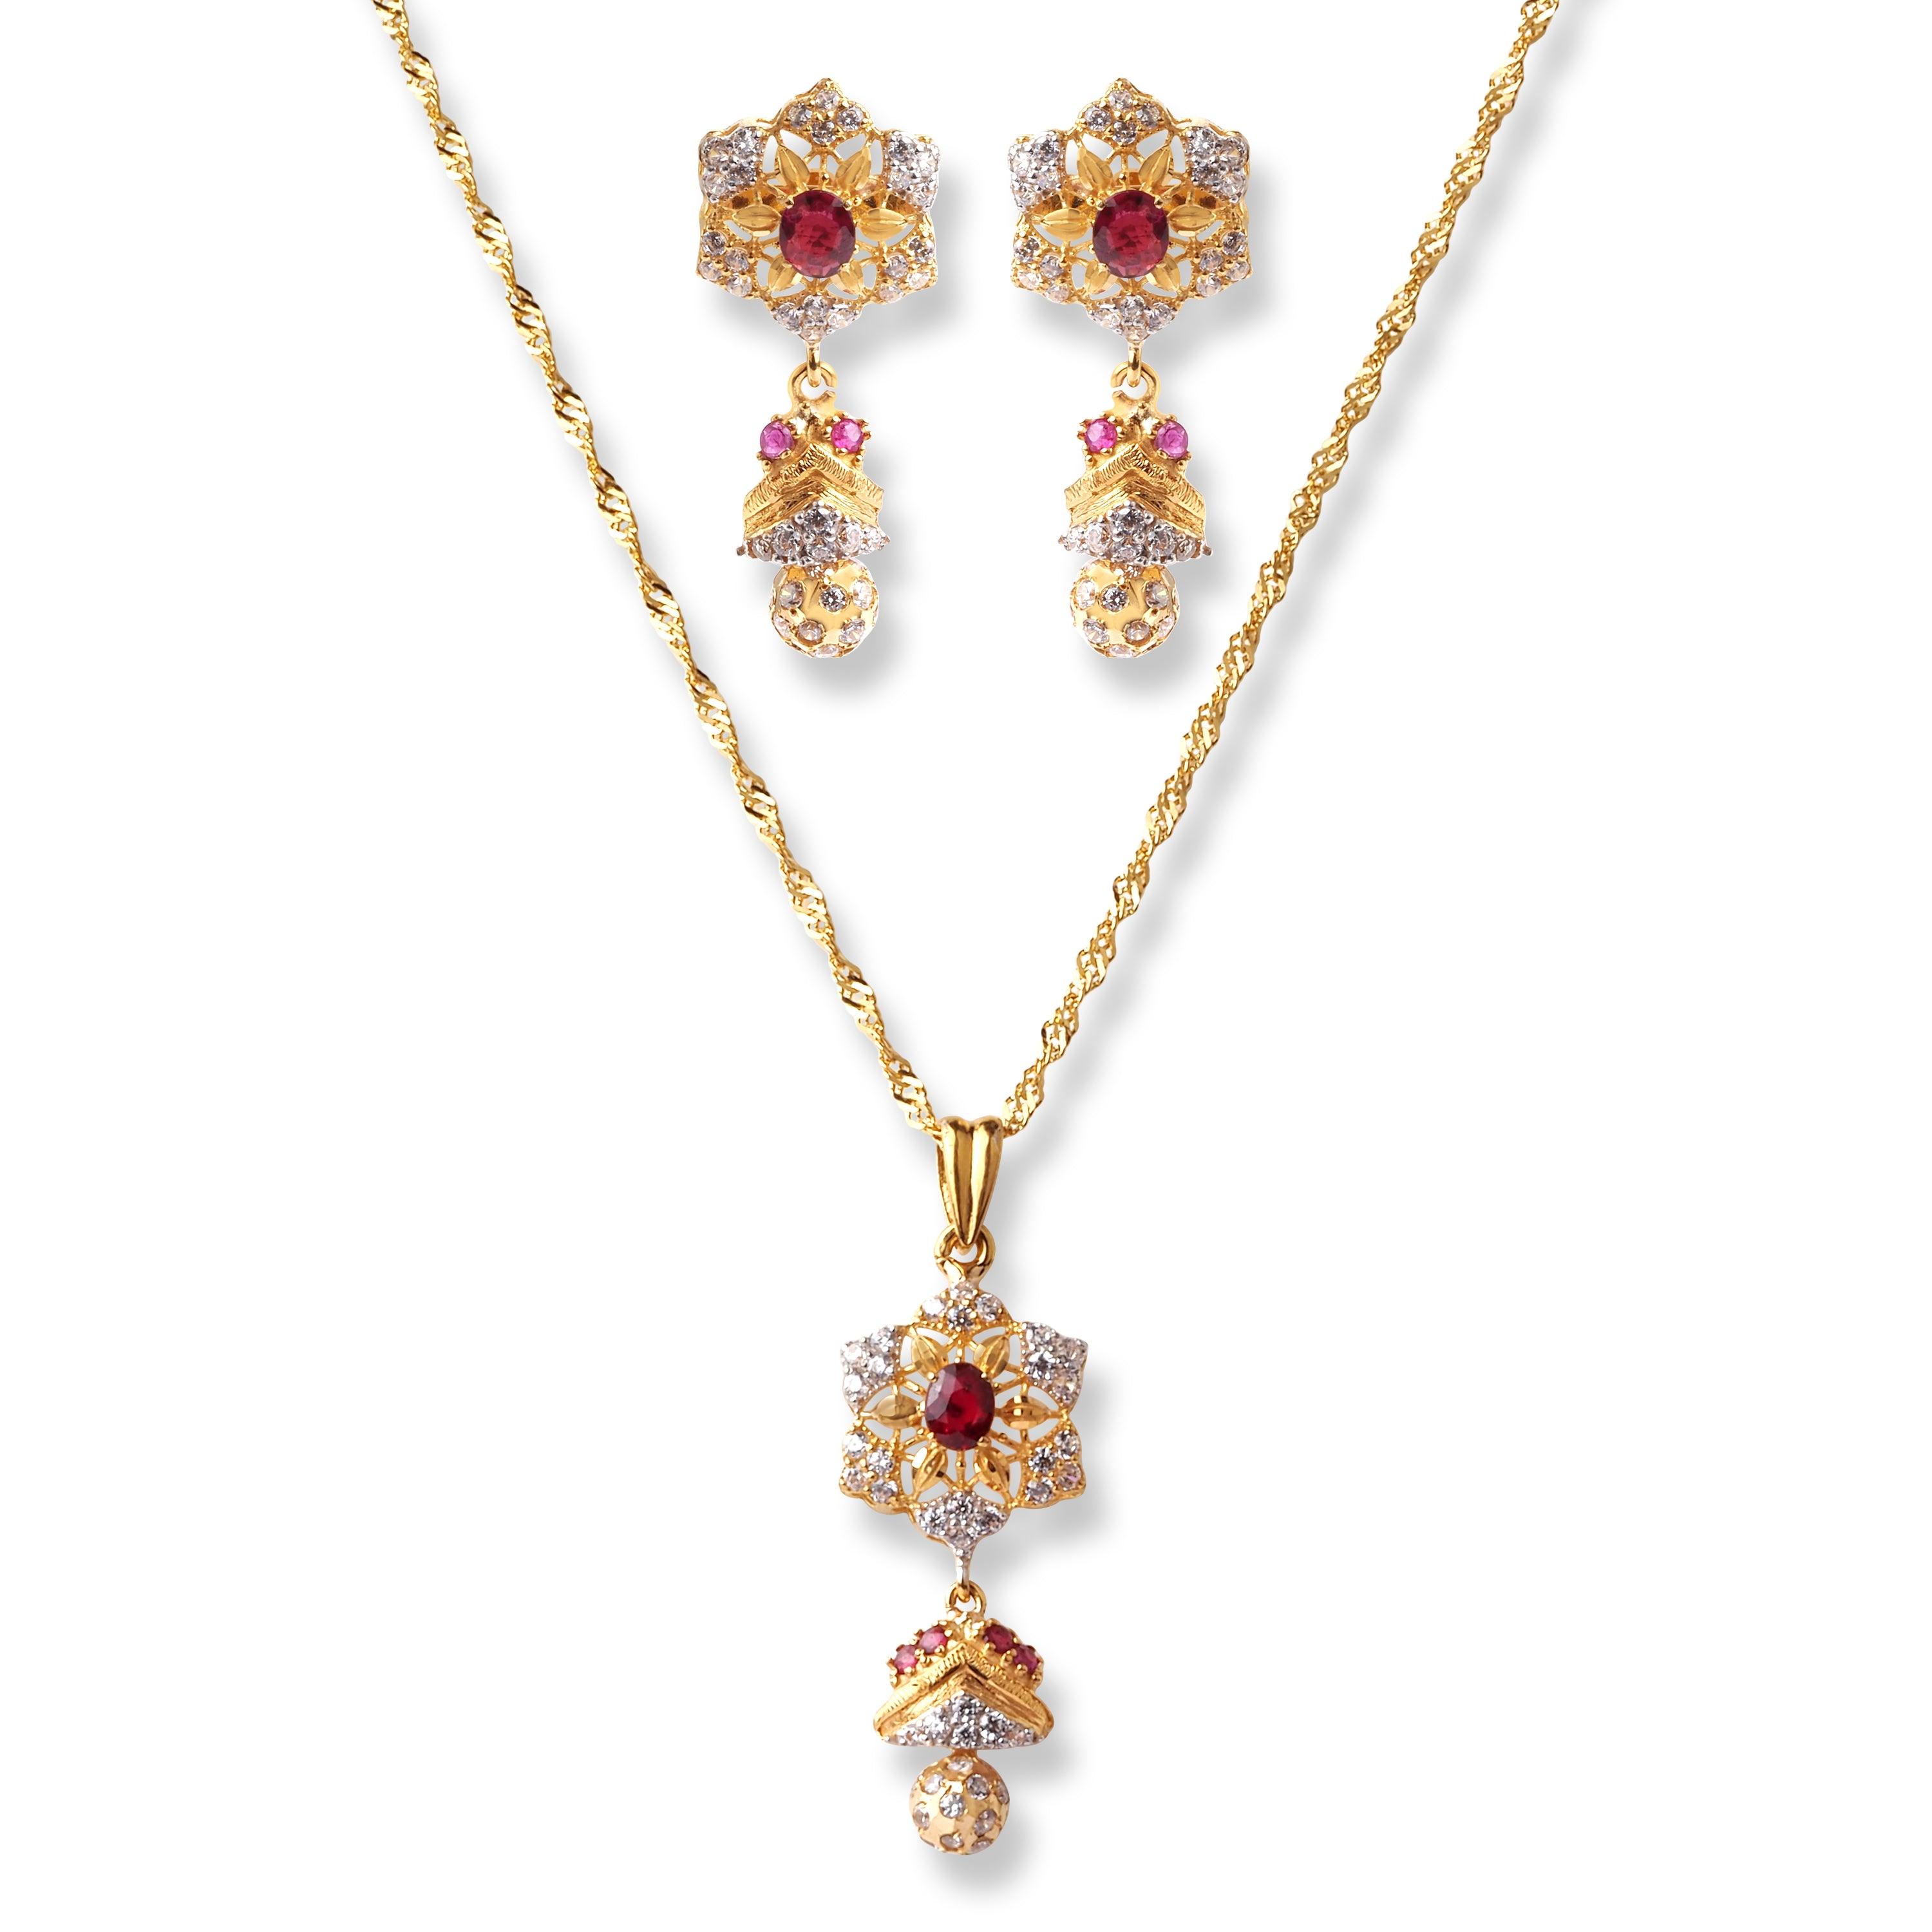 22ct Gold White & Red Cubic Zirconia with Drop Design Chain, Pendant and Earrings Set (13.8g) C-2803 P-7793 E-7793 - Minar Jewellers